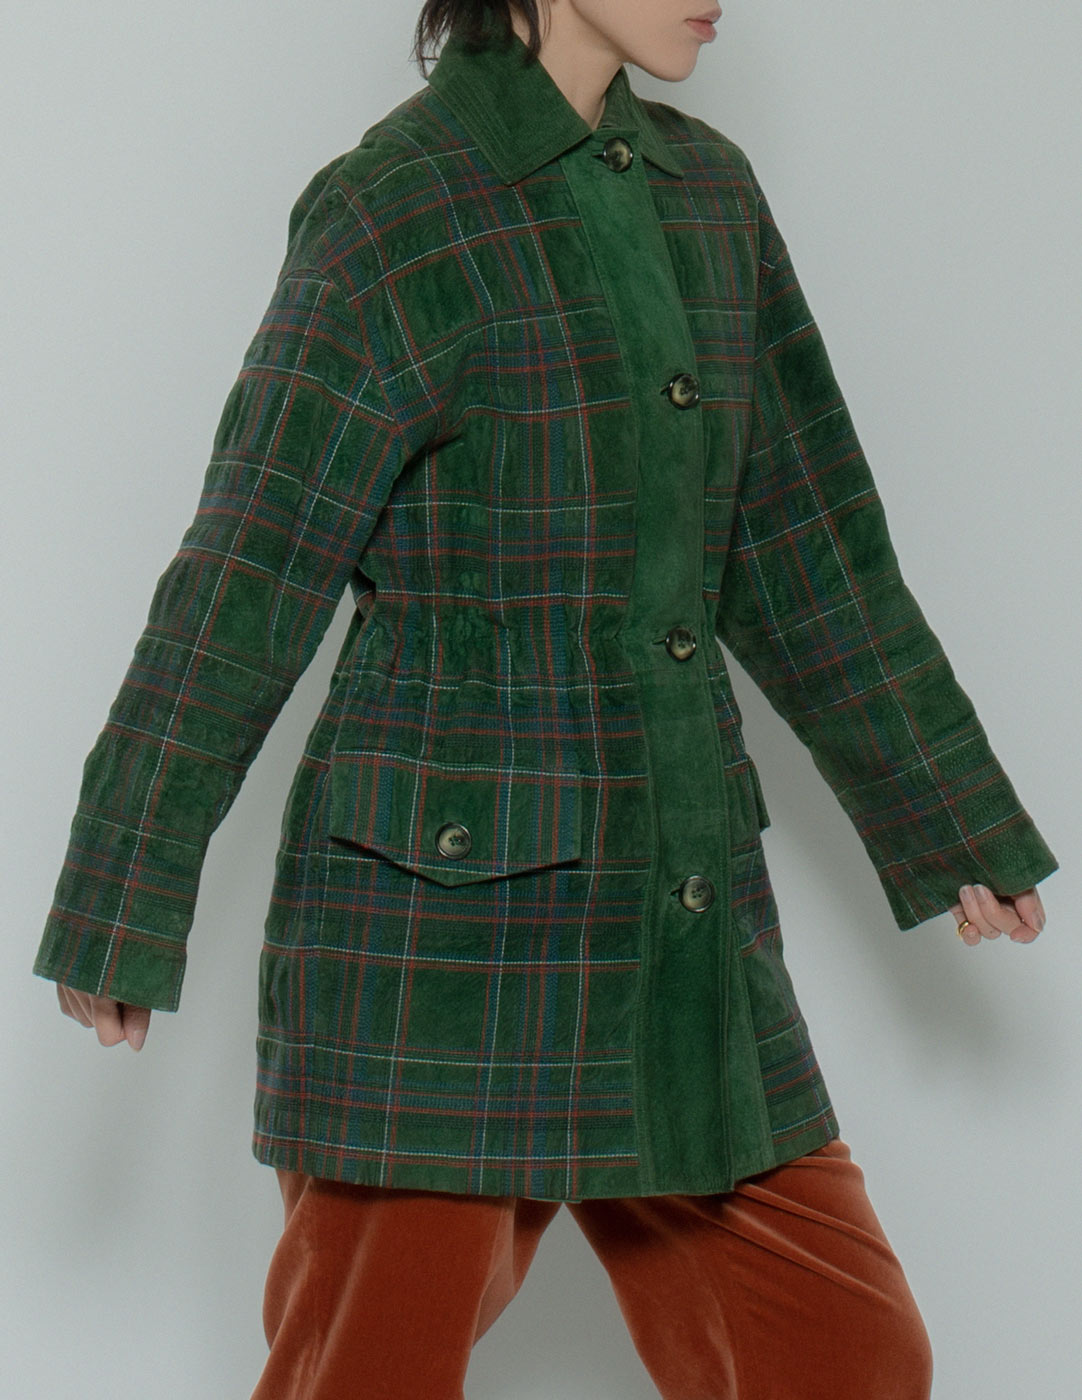 Loewe vintage forest green suede coat with plaid stitching front detail